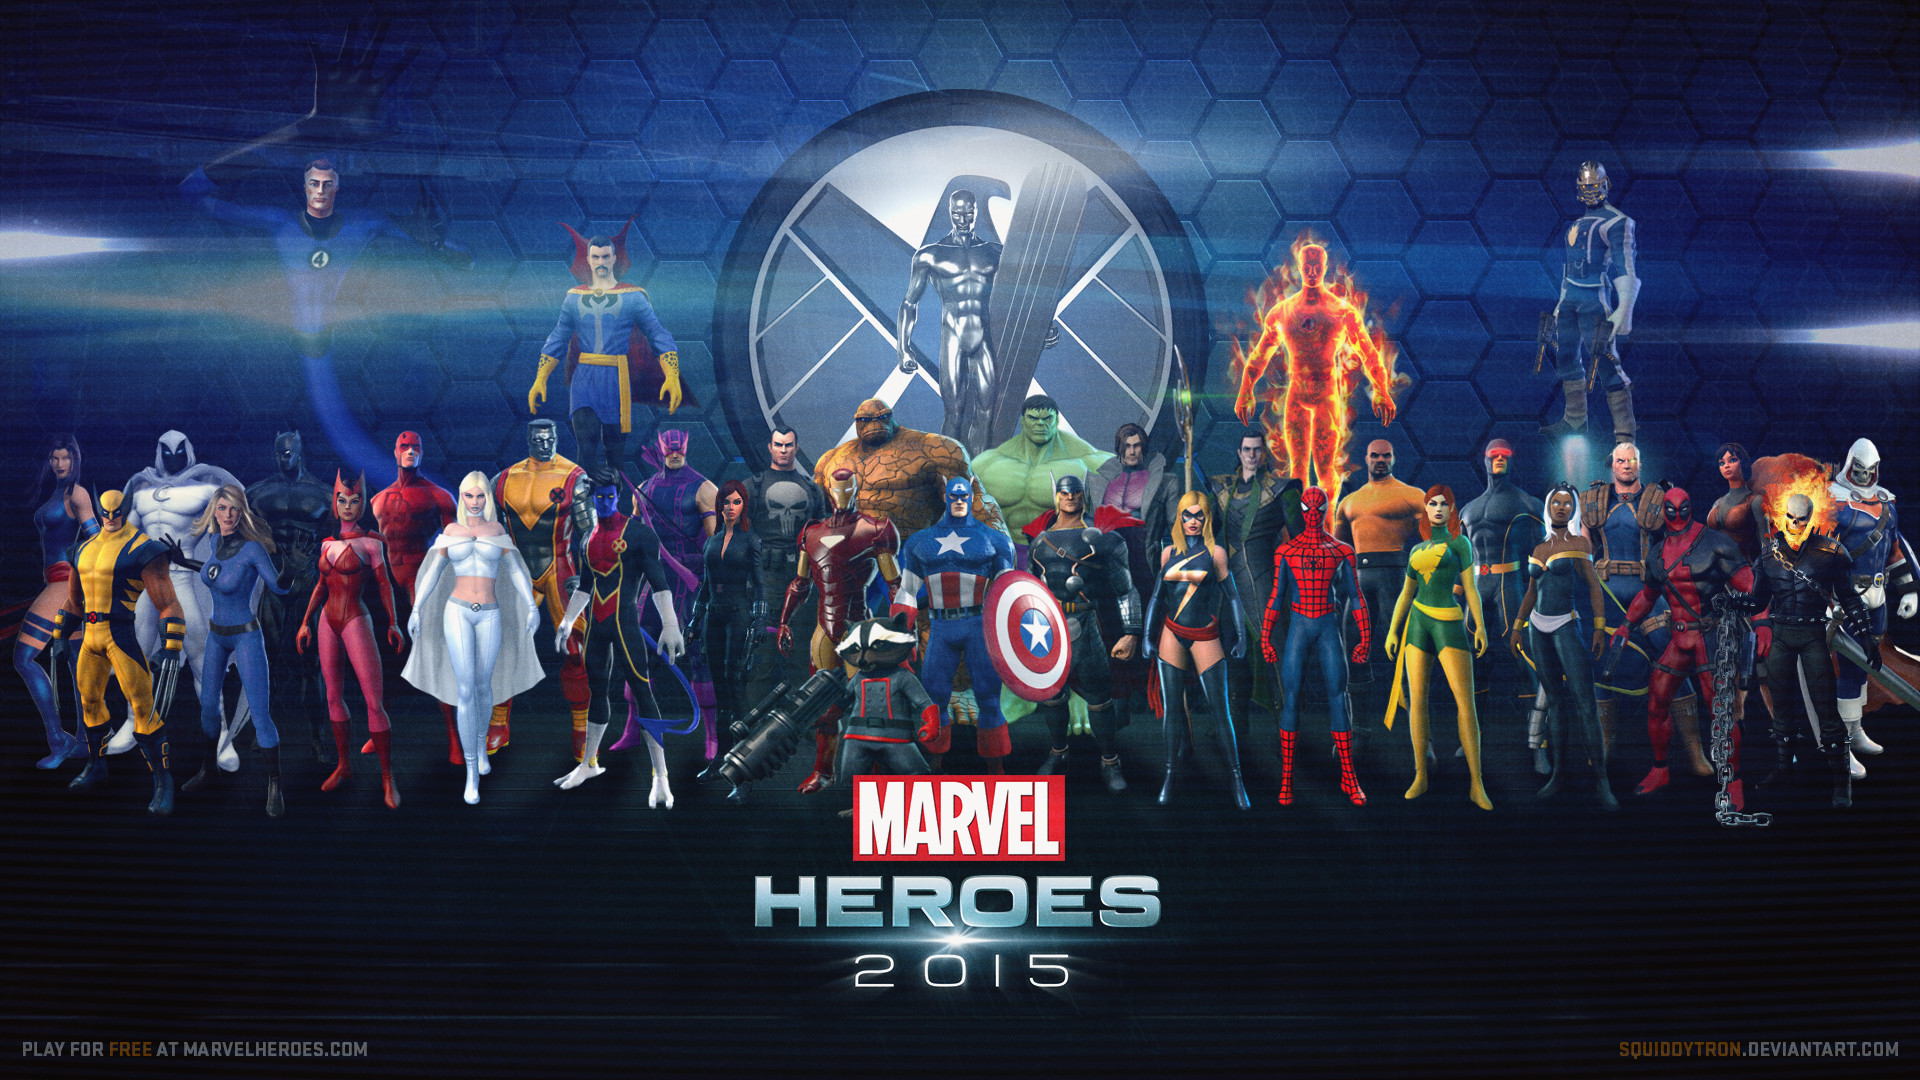 1920x1080 ... Marvel Heroes 2015 | Wallpaper (UPDATED 8/9) by Squiddytron